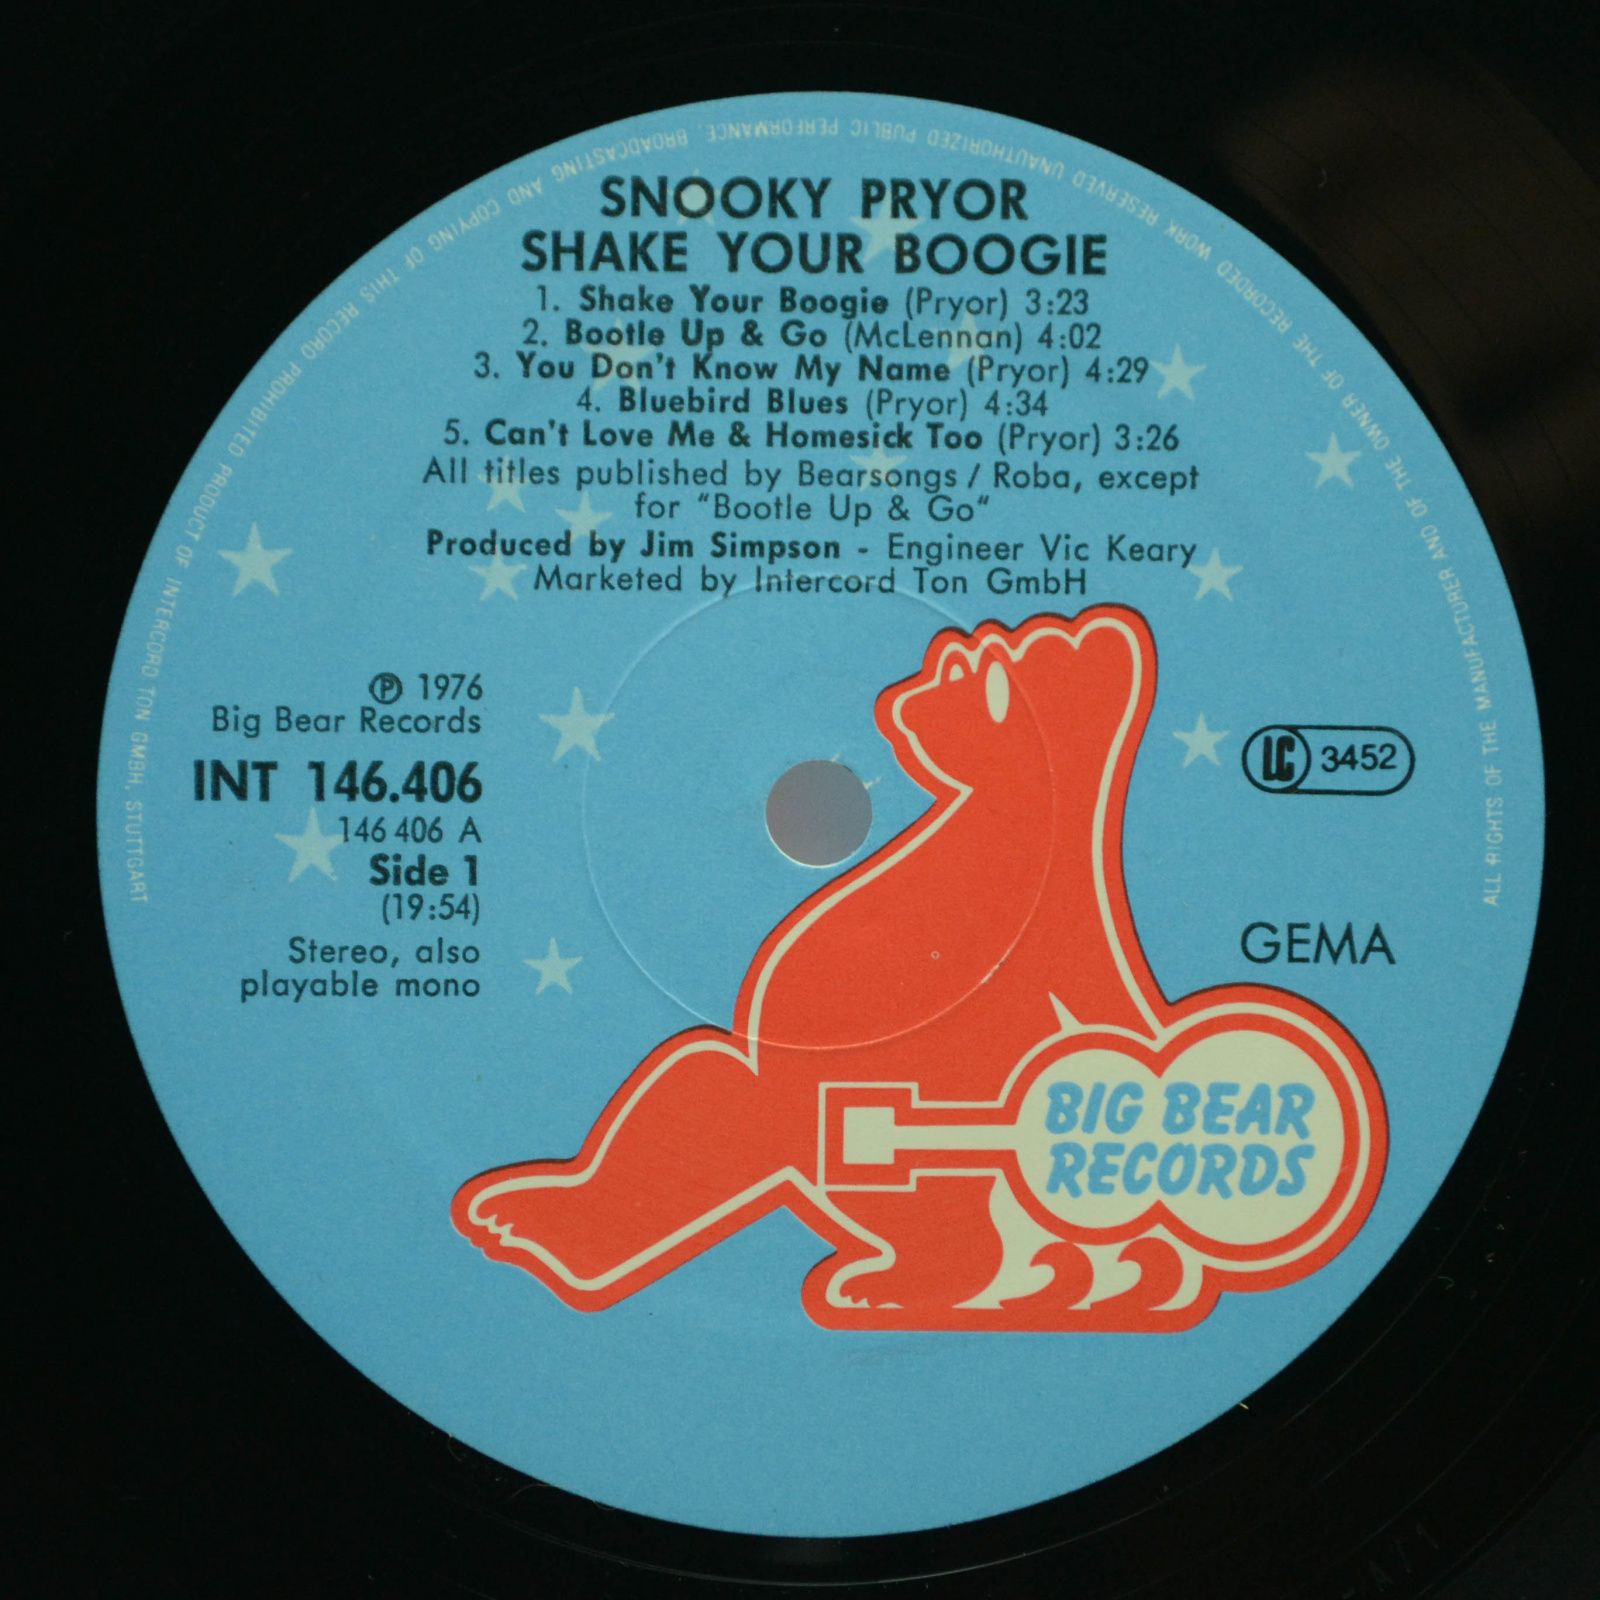 Snooky Prior — Shake Your Boogie, 1976